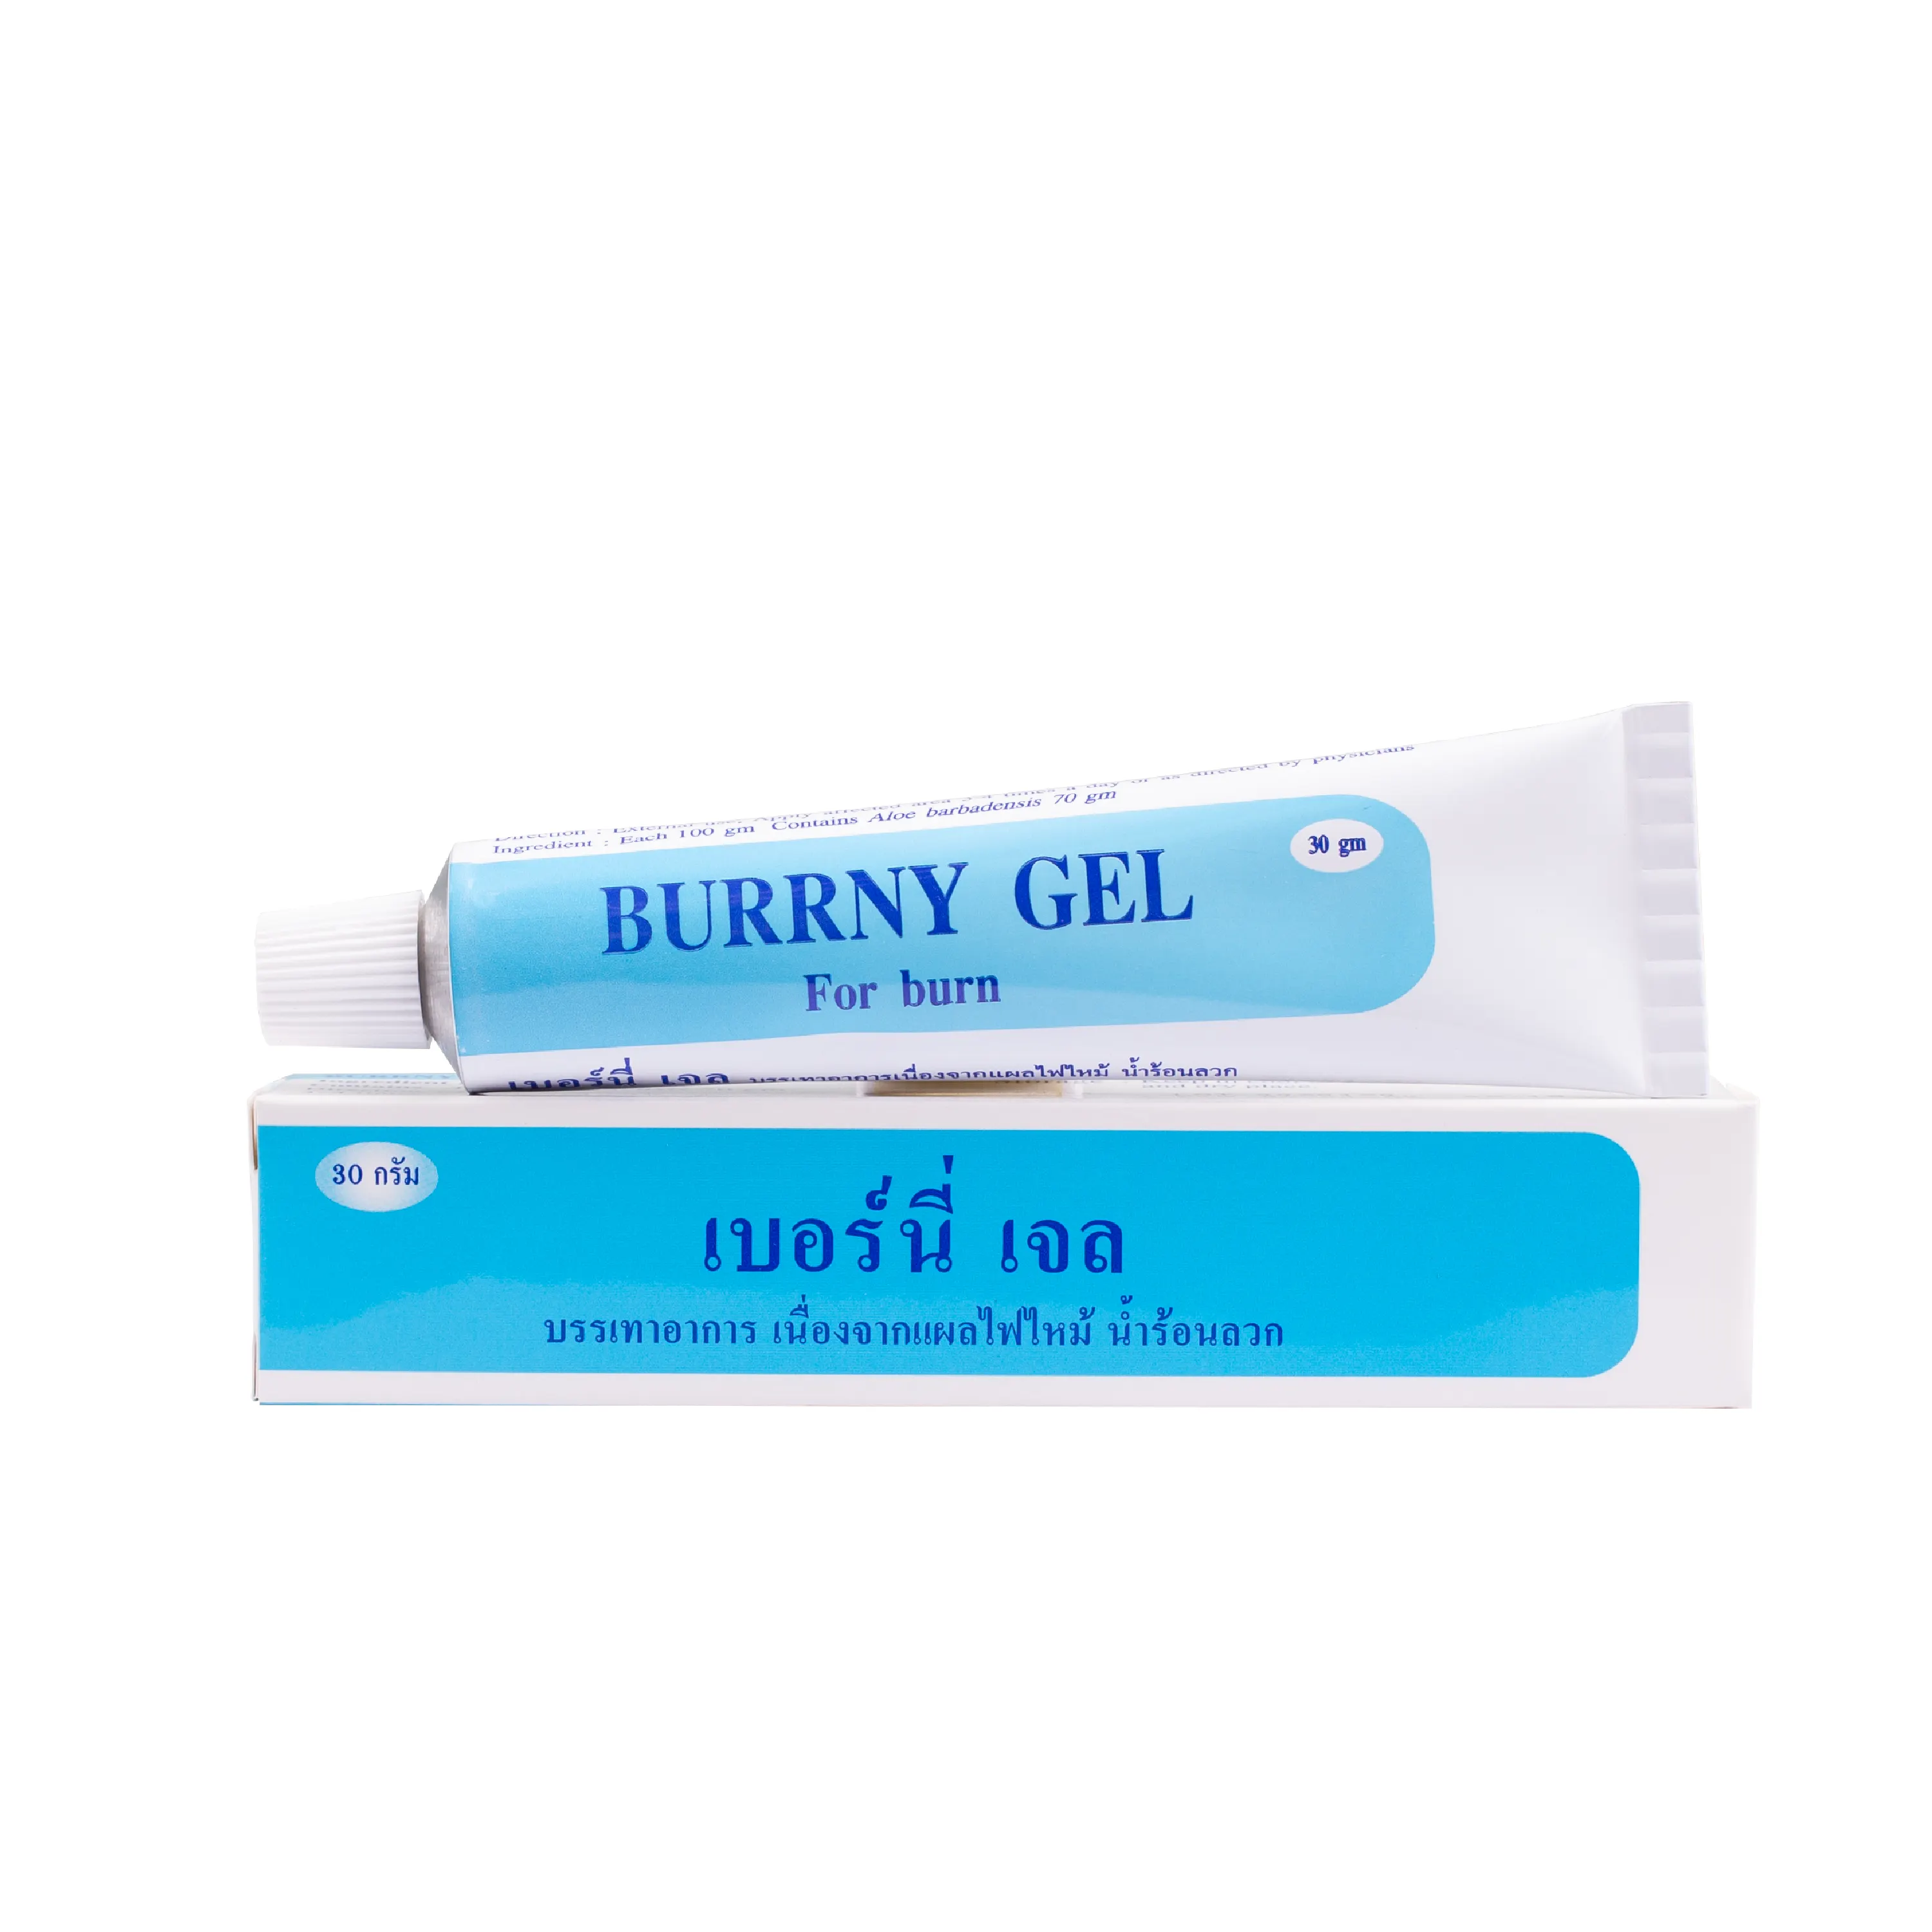 Yanhee Burrny Gel 30 gmTreat Burns The Hot Water Scalded Treat Burned Skin By Apply After Sunbathe Premium Product From Thailand